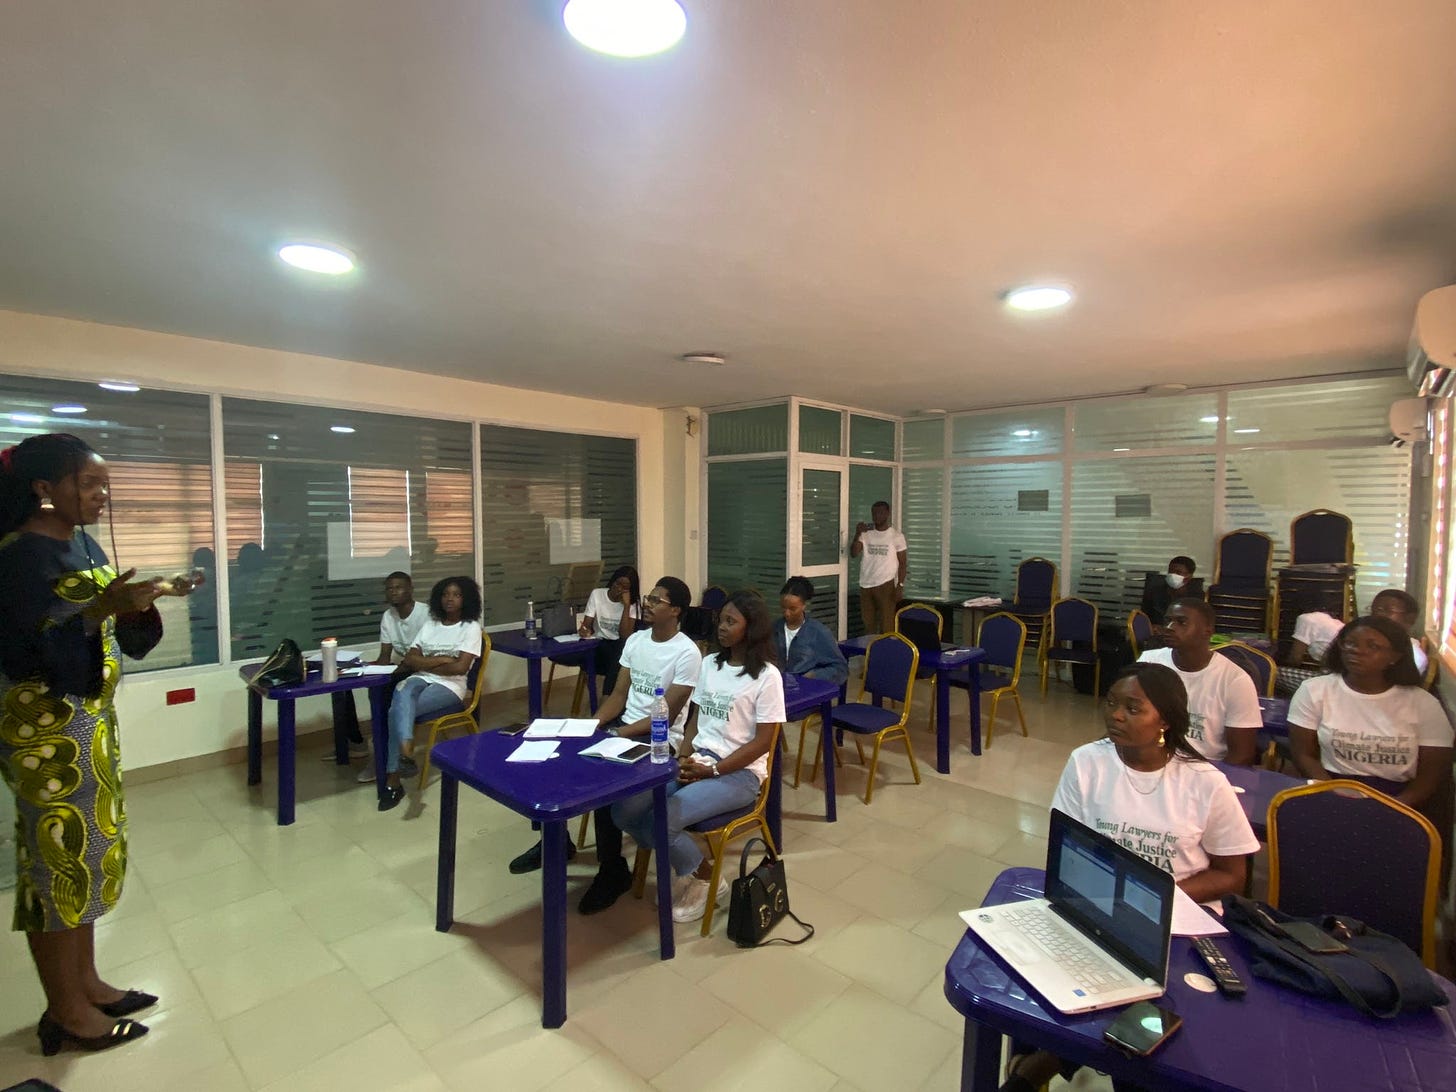 A classroom in Nigeria with a woman teaching a group of students in a uniform of white shirts and jeans